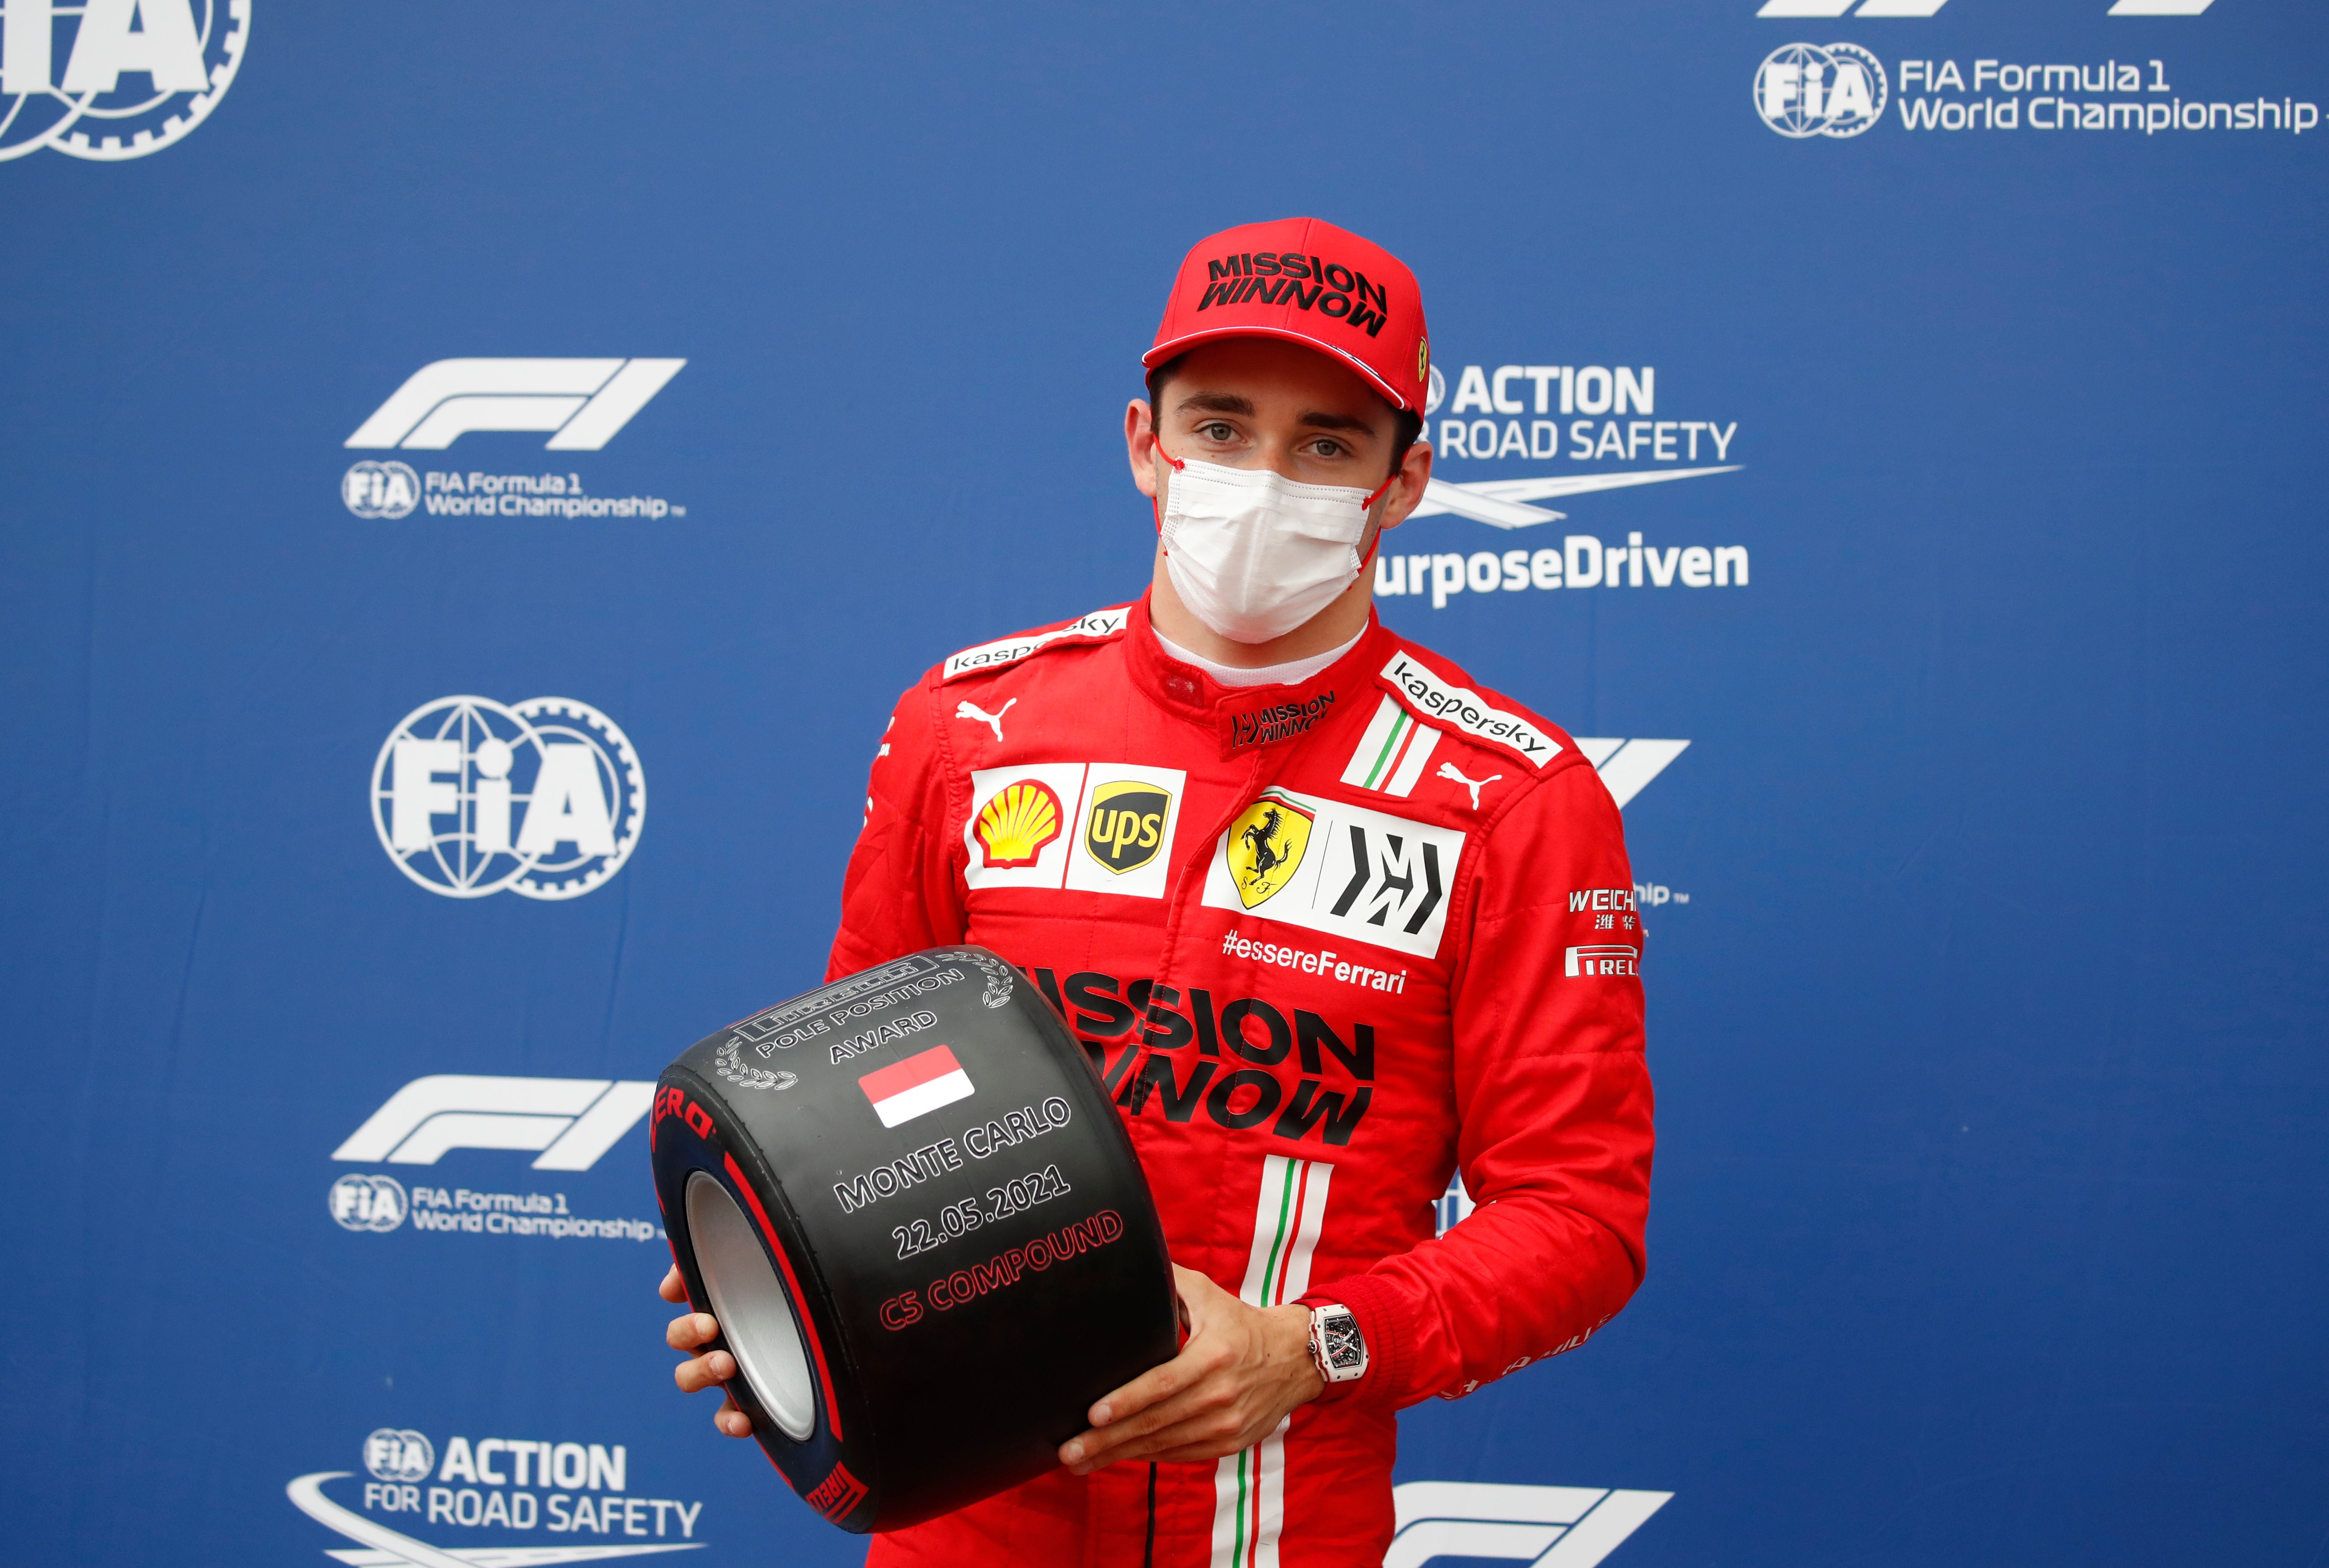 Charles Leclerc will have to wait to see if he retains pole position